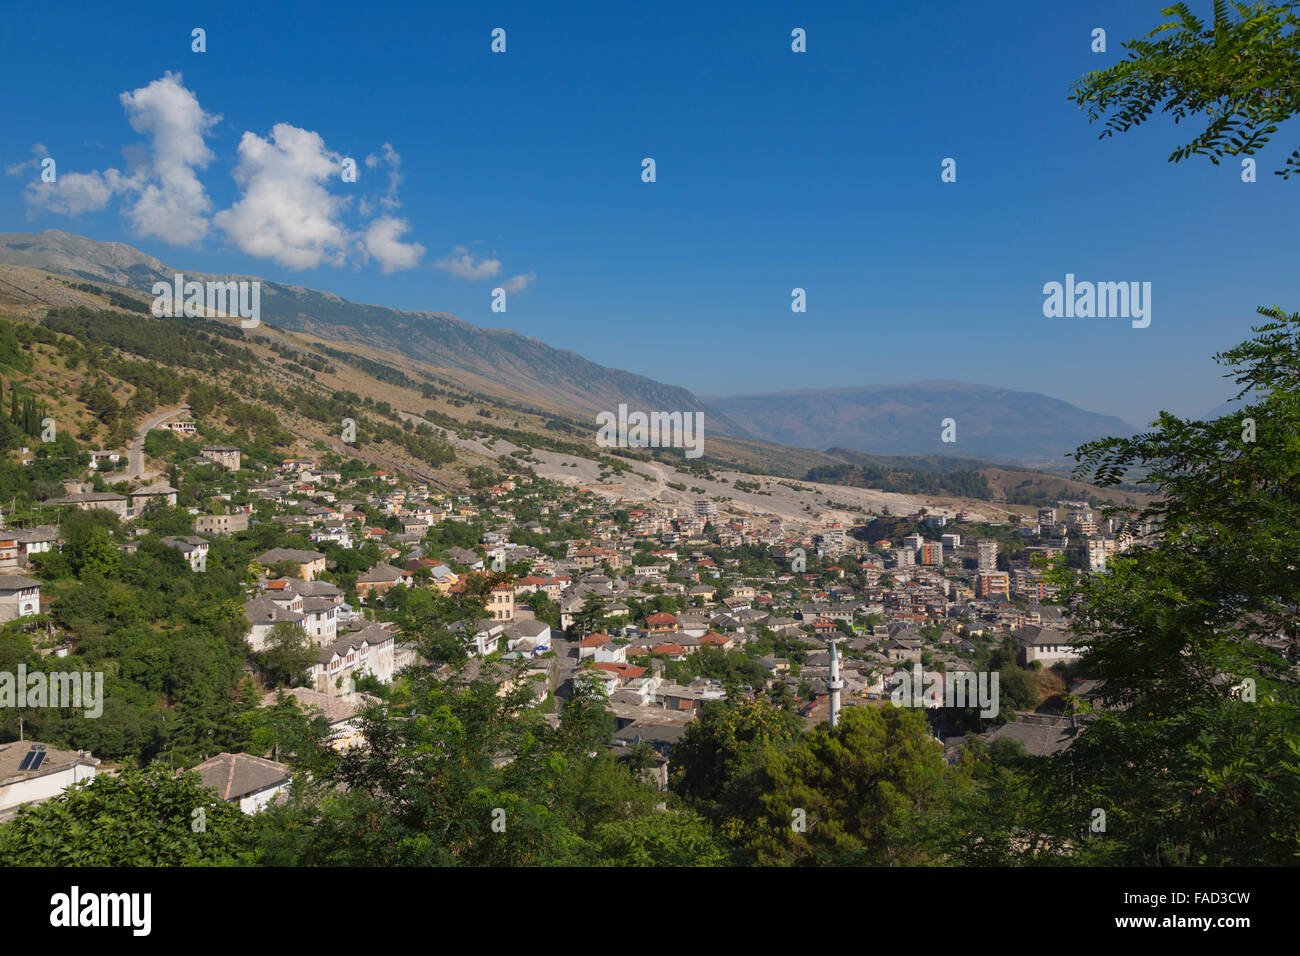 Gjirokastra or Gjirokaster, Albania.  Looking across the typical architecture of the old town to new suburbs beyond. Stock Photo